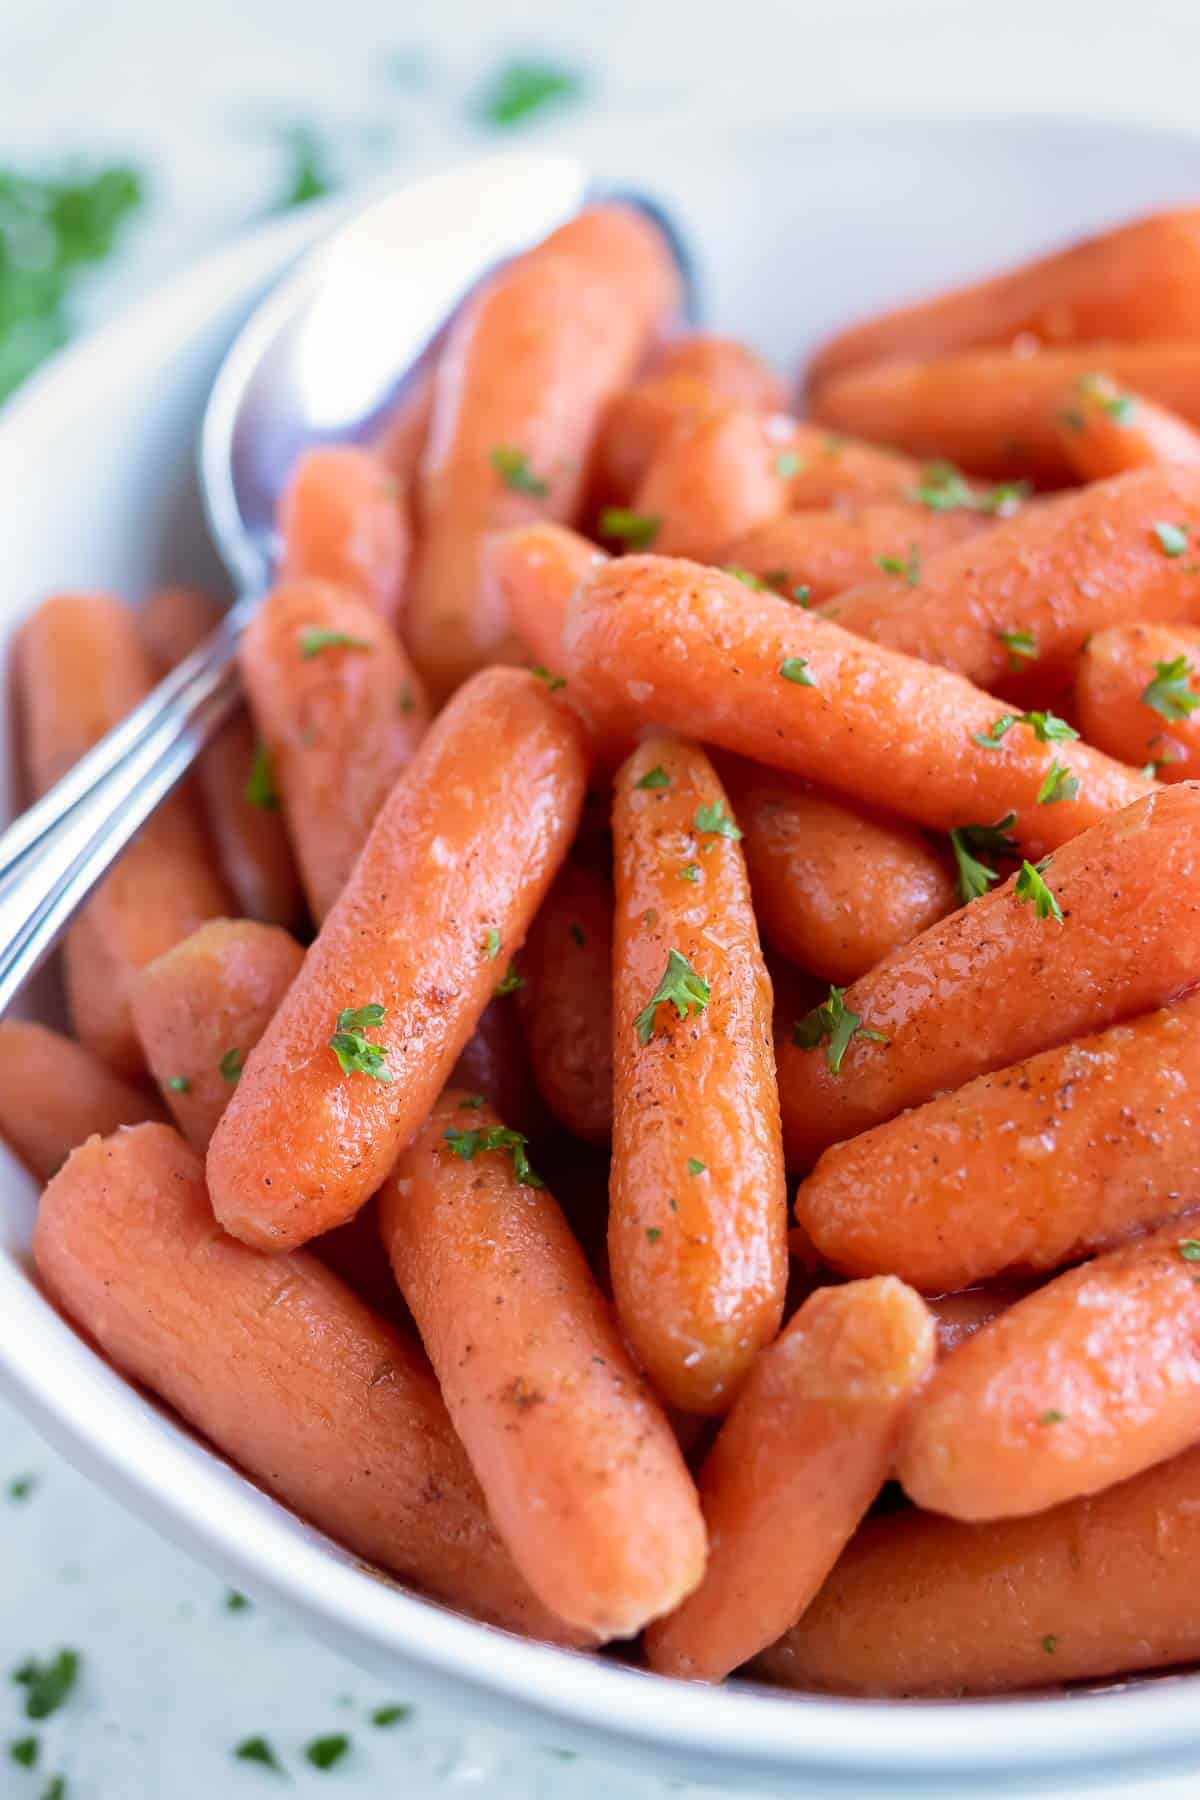 Instant pot carrots are served with a metal spoon.